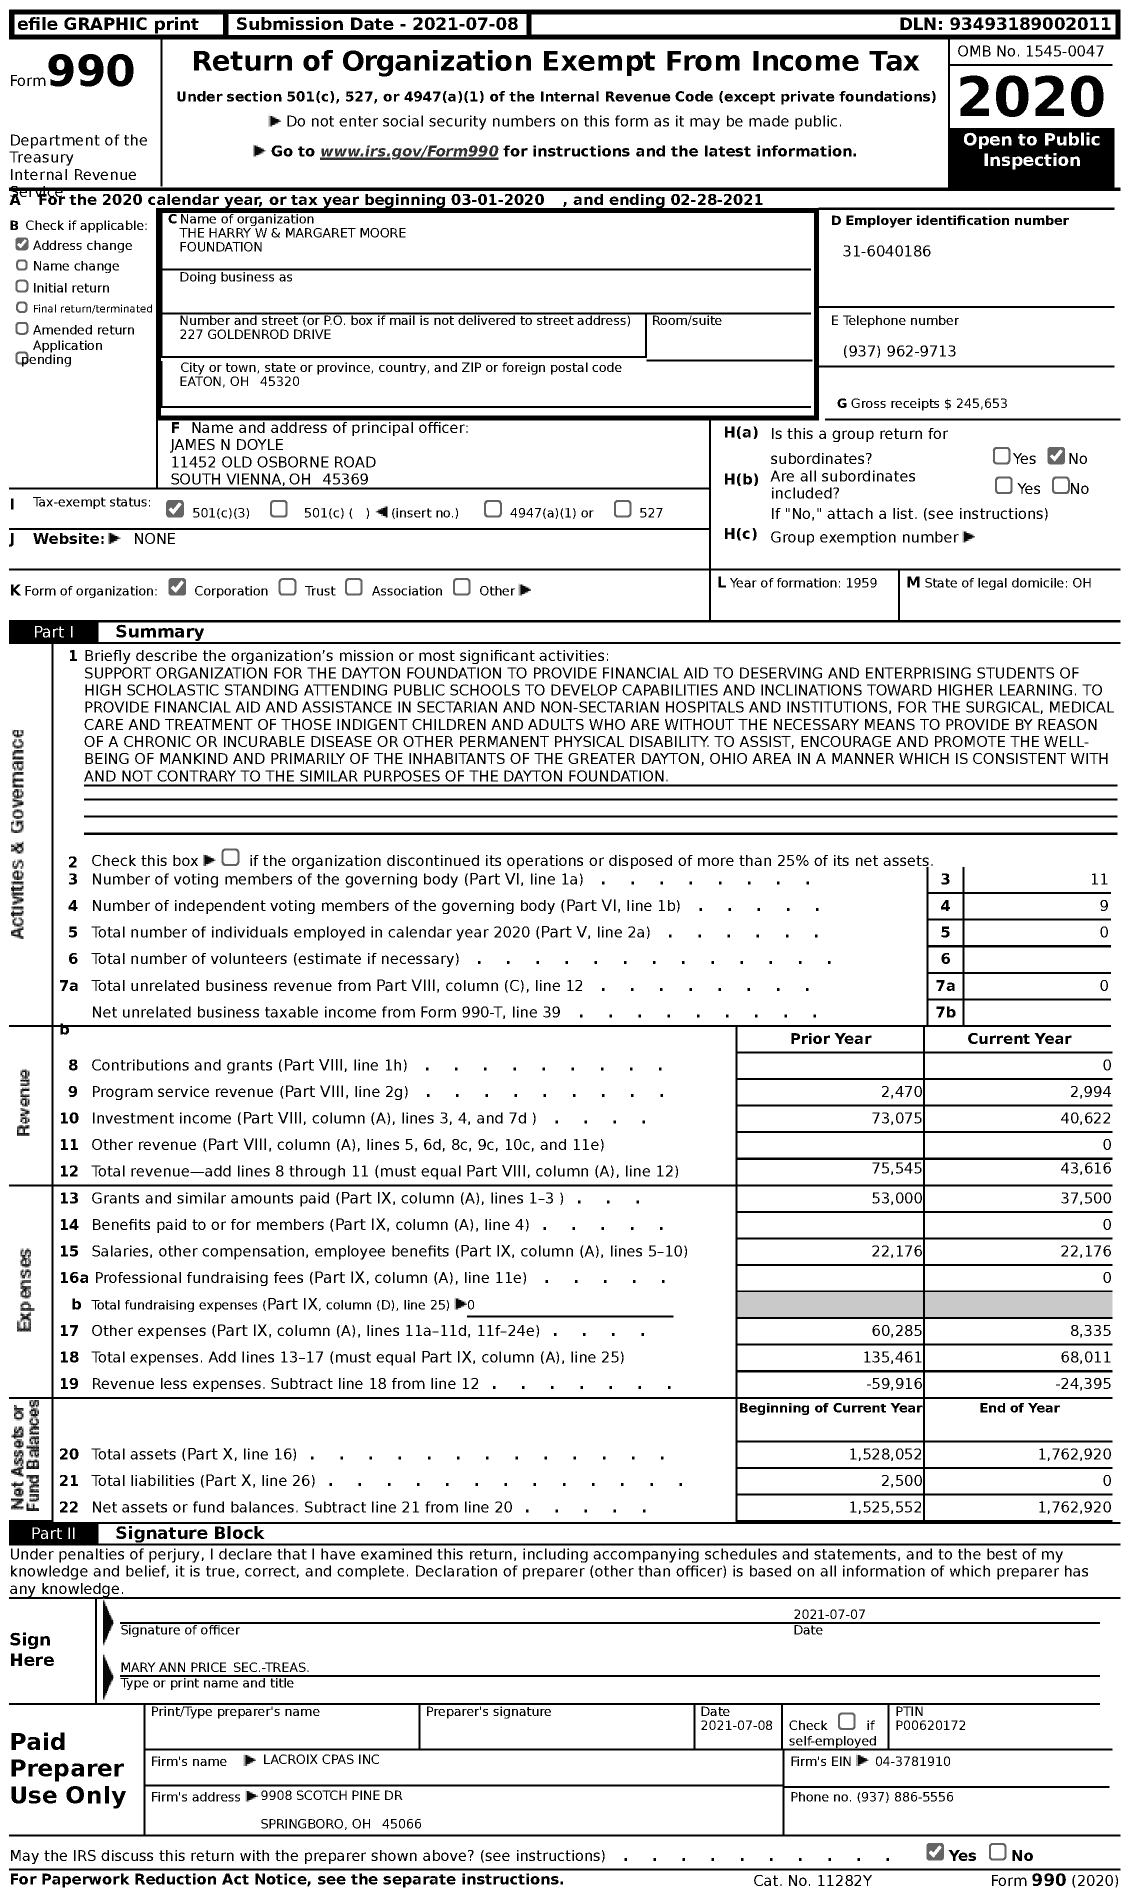 Image of first page of 2020 Form 990 for The Harry W and Margaret Moore Foundation